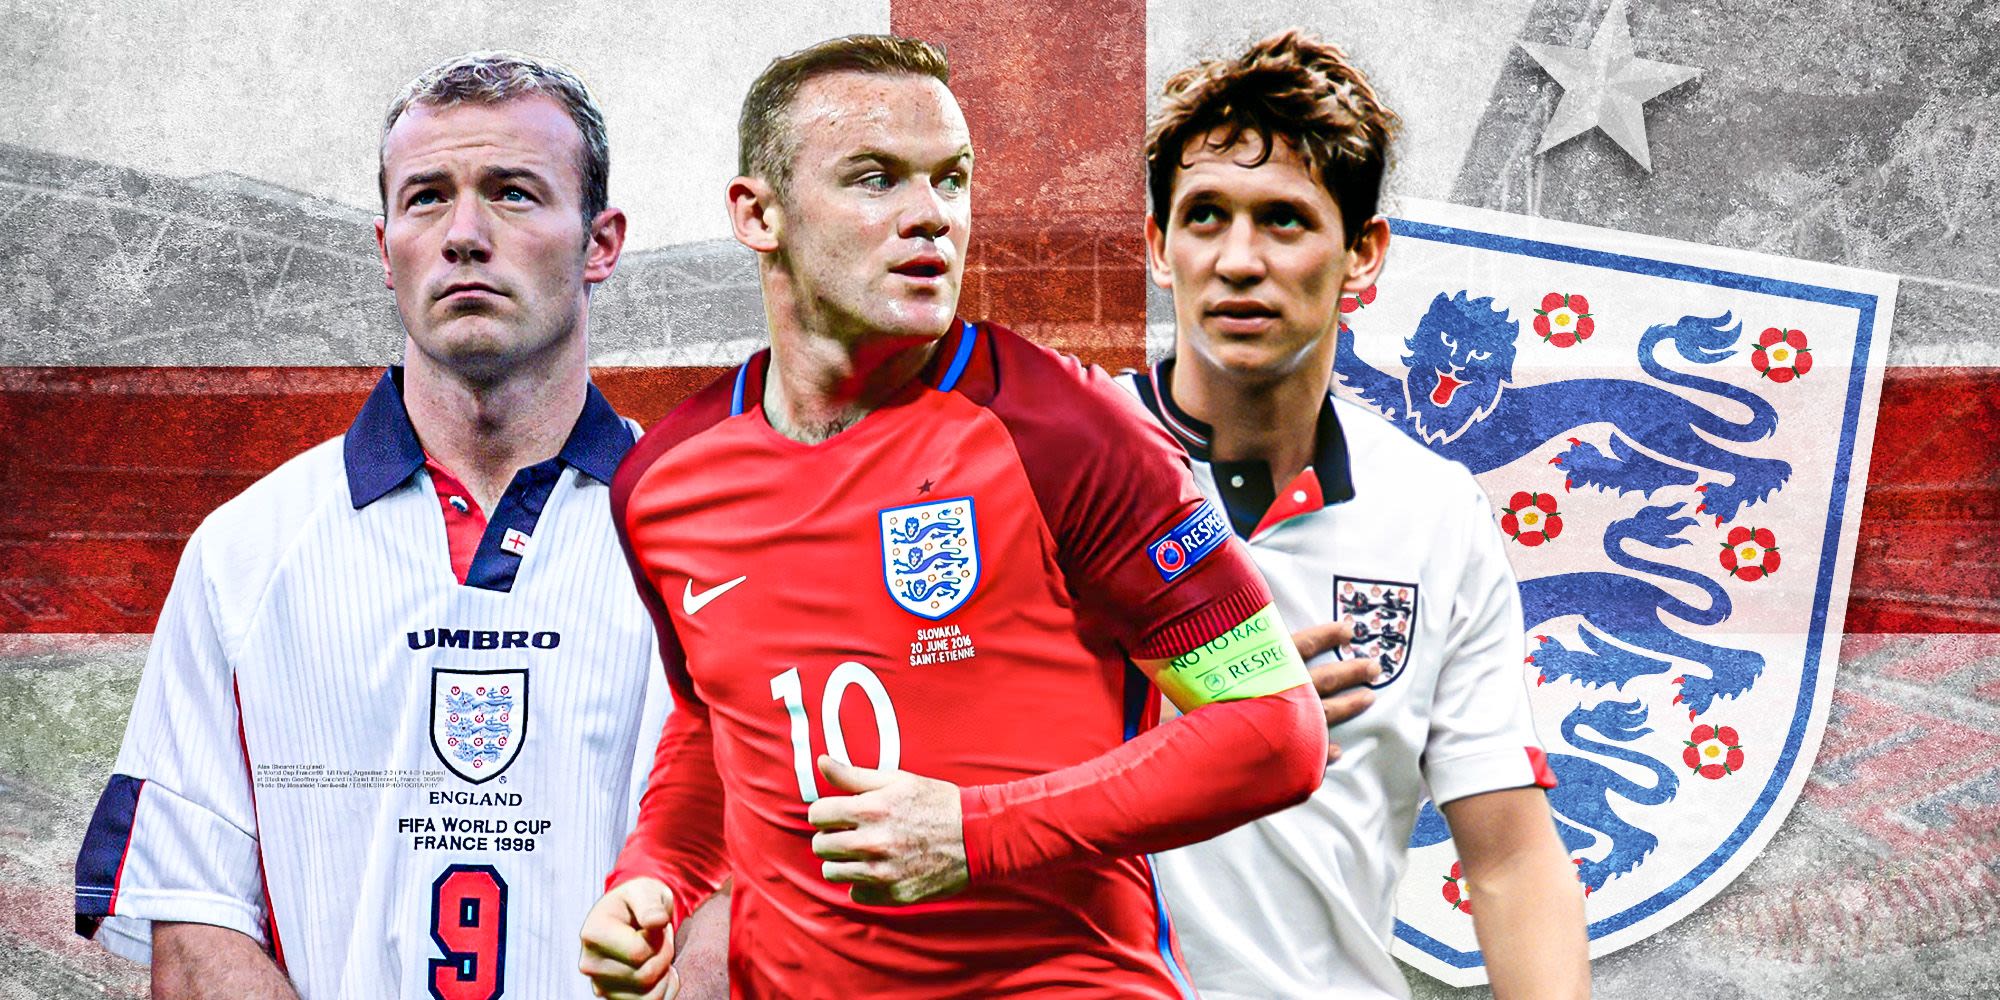 The 10 greatest English attackers in football history have been ranked